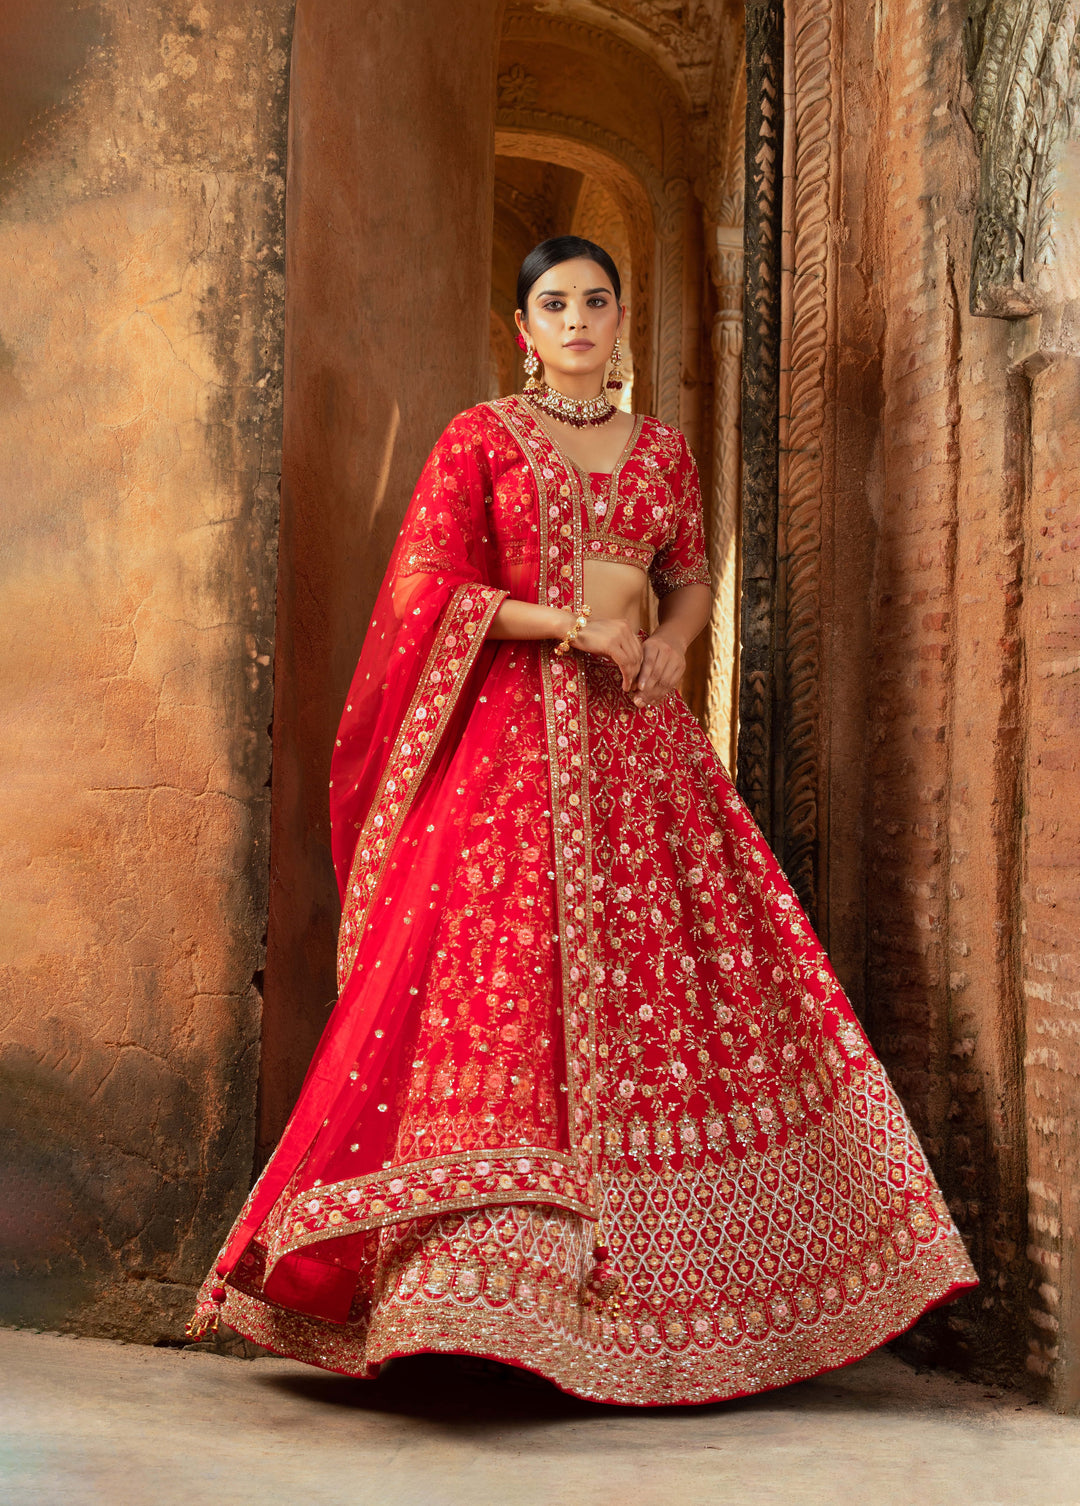 Red Silk Bridal Lehenga with Sequins, Cutdana, and Hand-Embroidery